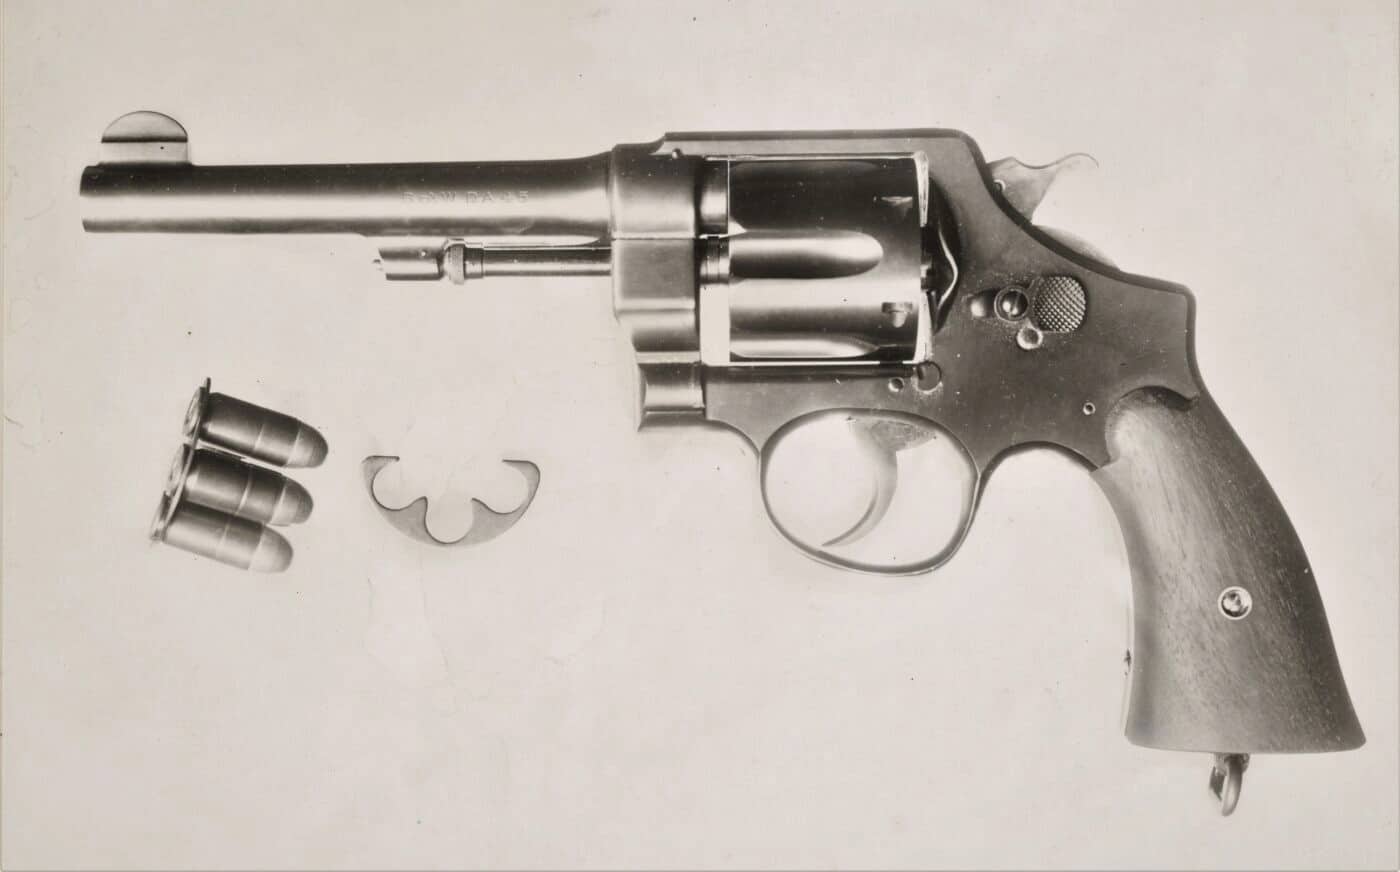 45 cal m1917 revolver and feed clips